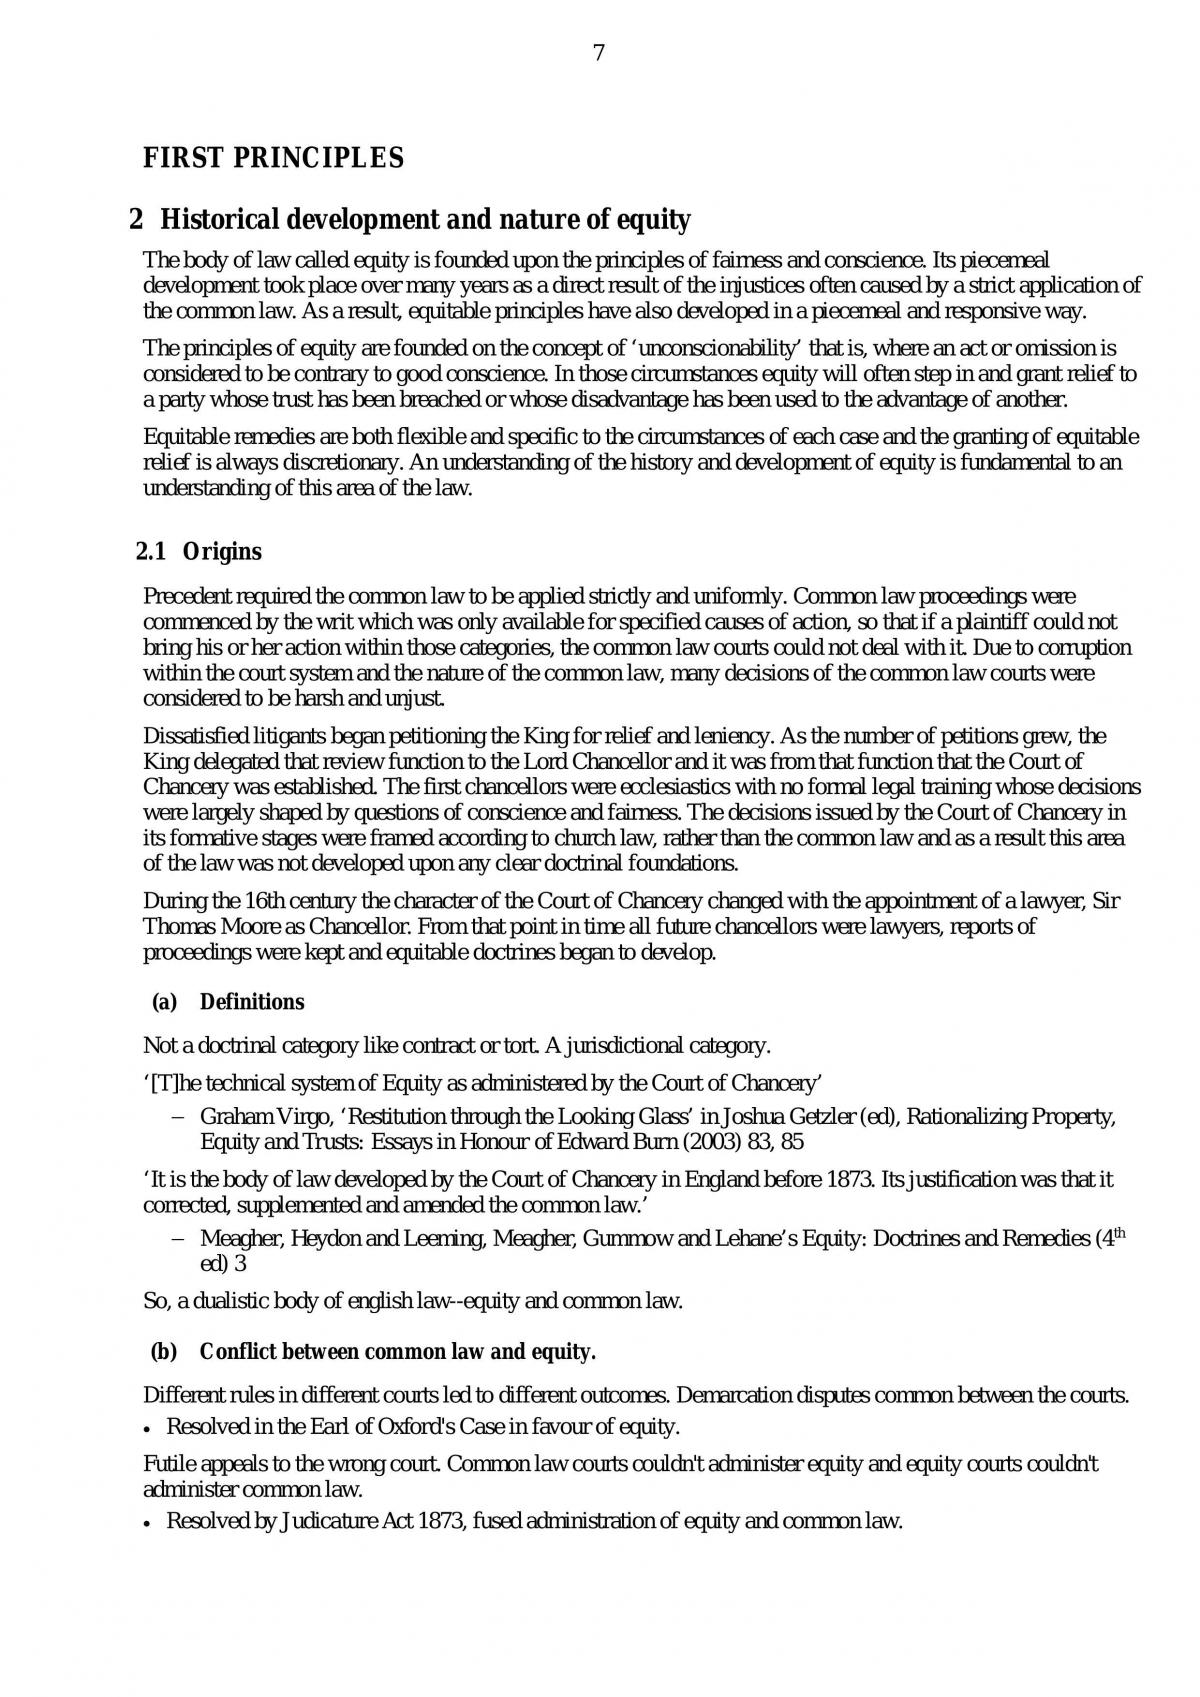 Complete Notes for LAWS6205 - Equity and Trusts - Page 7